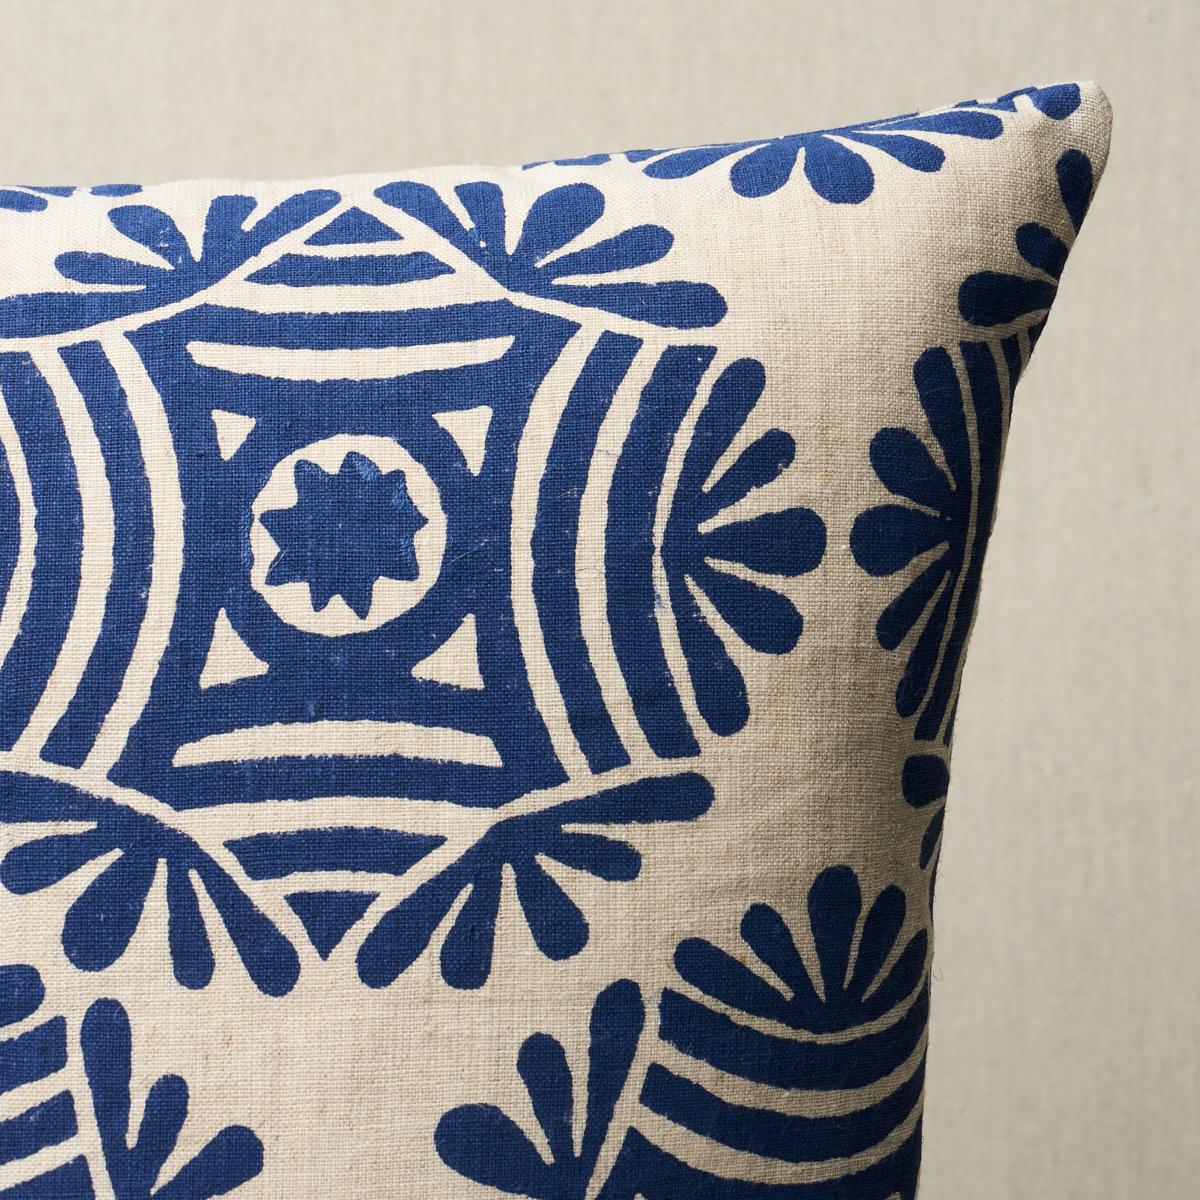 This pillow features Gilded Star Block Print by Drusus Tabor with a knife edge finish. Created in collaboration with Drusus Tabor and printed by hand on a soft linen ground, Gilded Star Block Print has the subtle variations and wonderful nuances